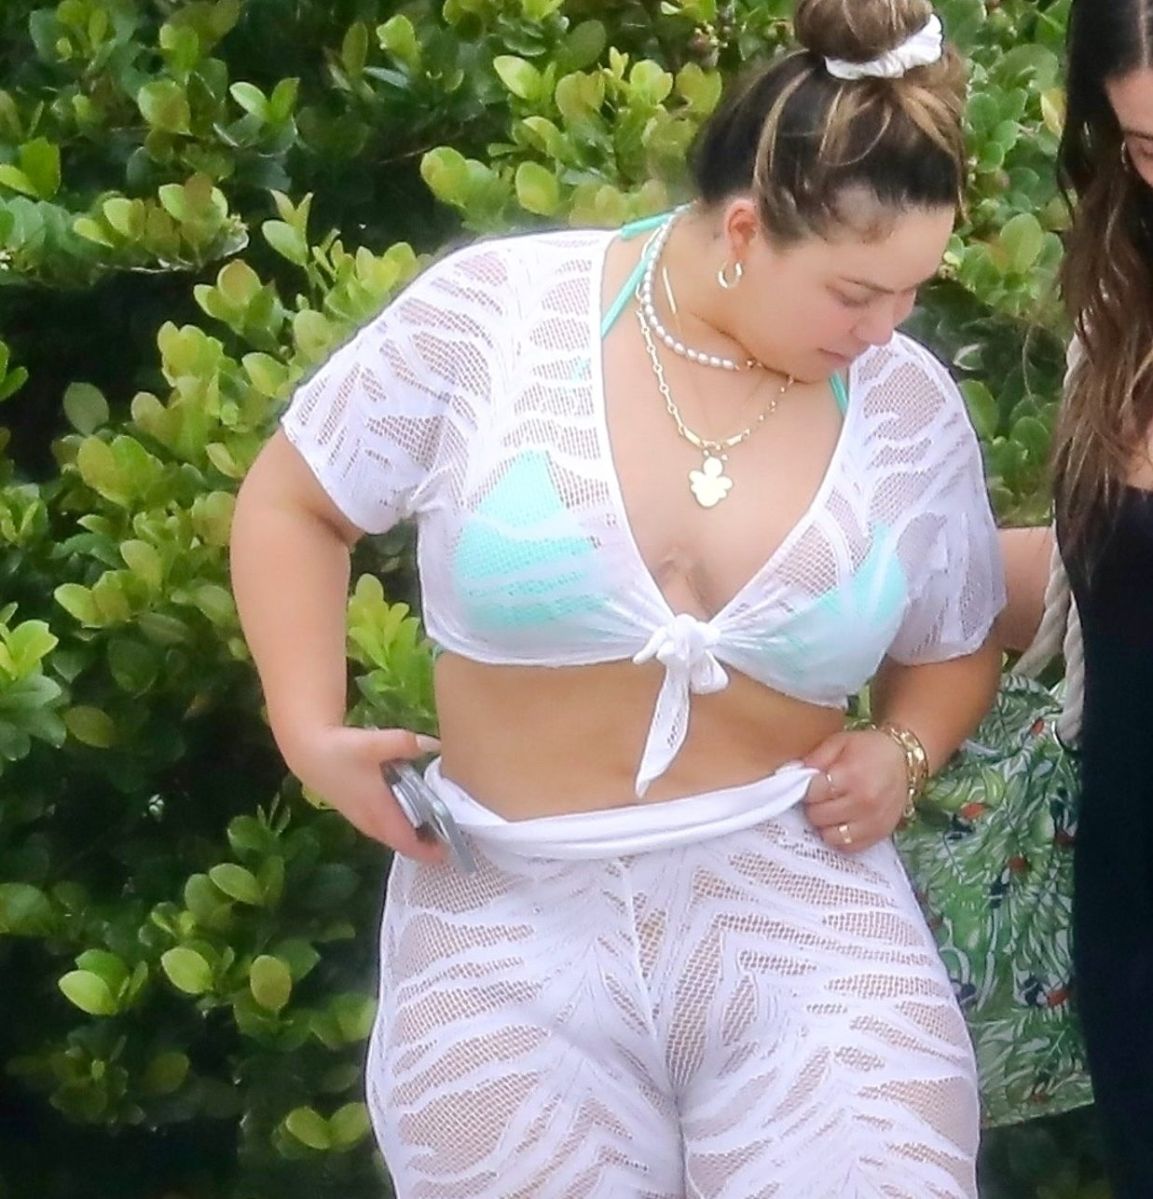 They point out that Chiquis Rivera wore her pants backwards for wearing a Karol G-style bodysuit and going out to model it in the middle of the mall